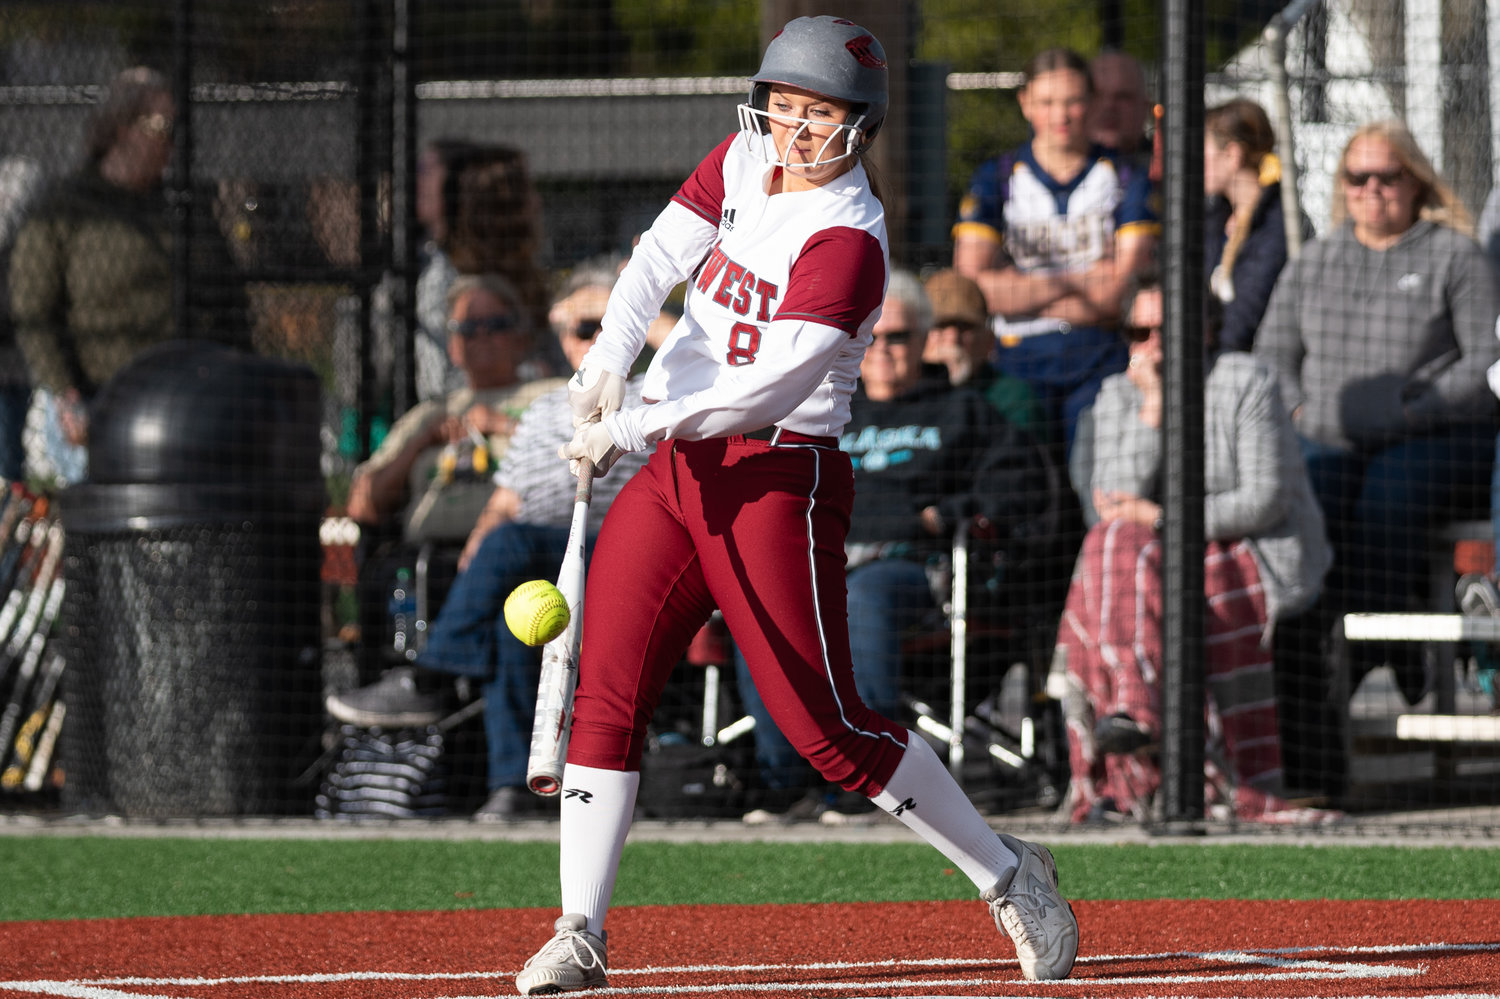 W.F. West's Staysha Fluetsch makes contact with a pitch against Tumwater in the 2A District 4 championship game at Rec Park May 20.